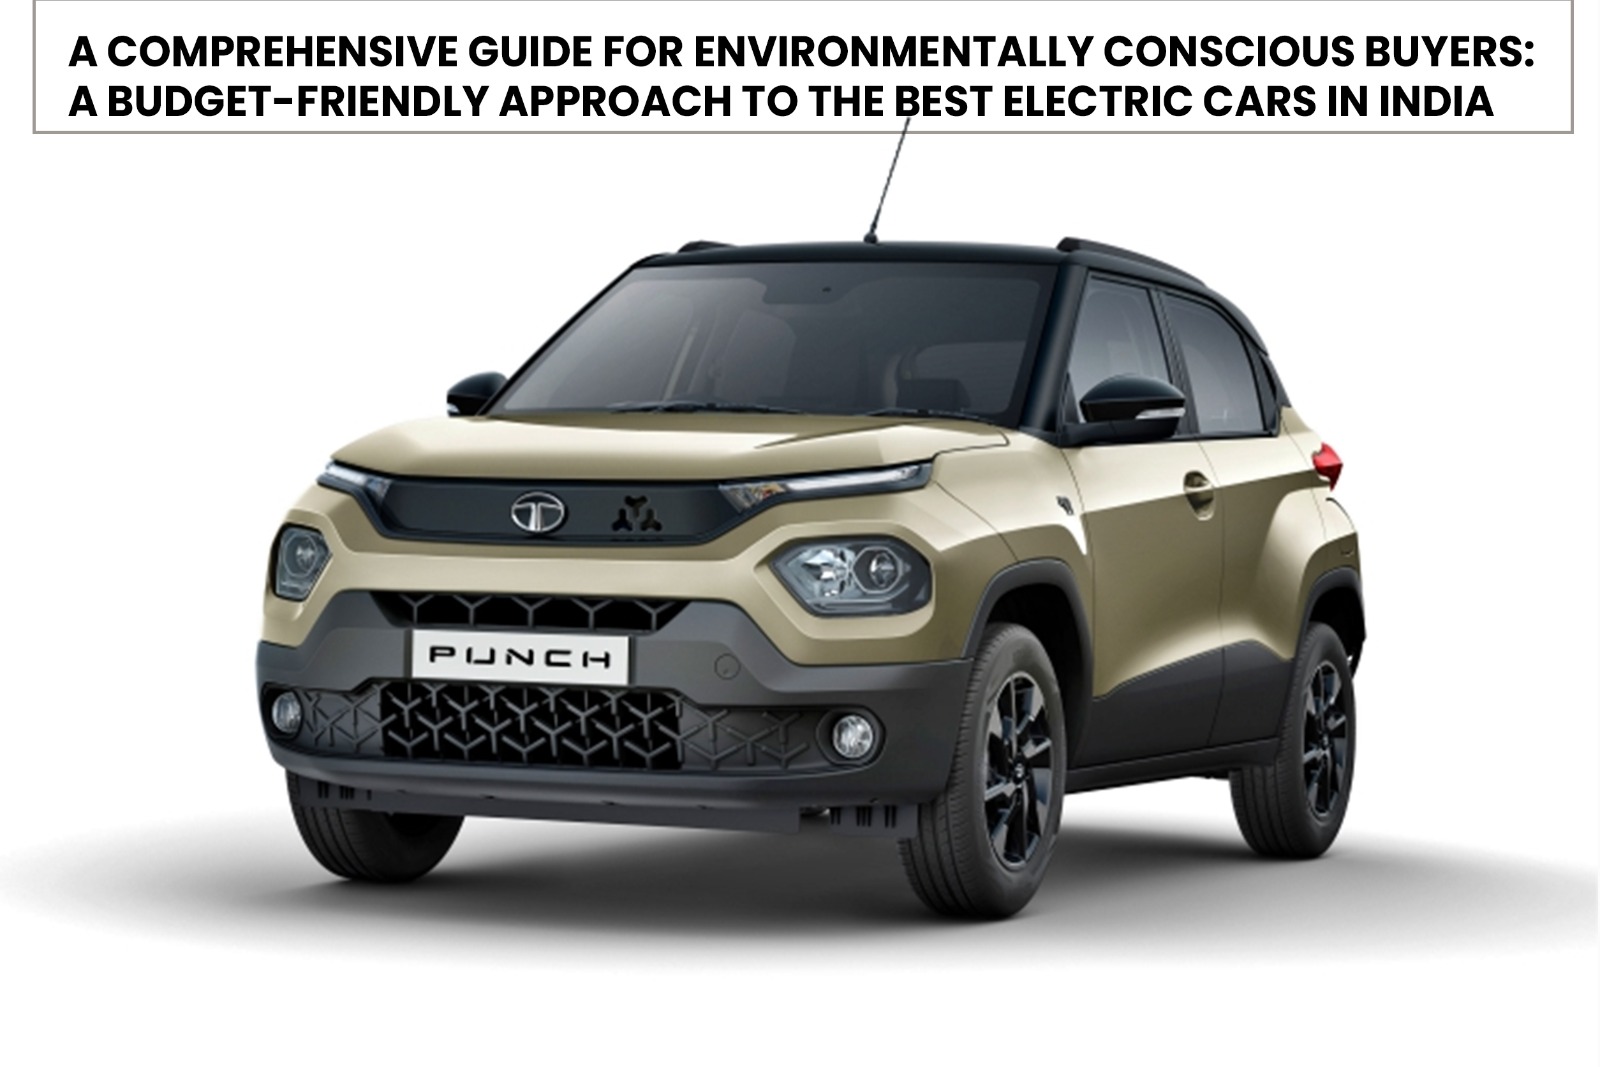 A Comprehensive Guide for Environmentally Conscious Buyers: A Budget-Friendly Approach to the Best Electric Cars in India